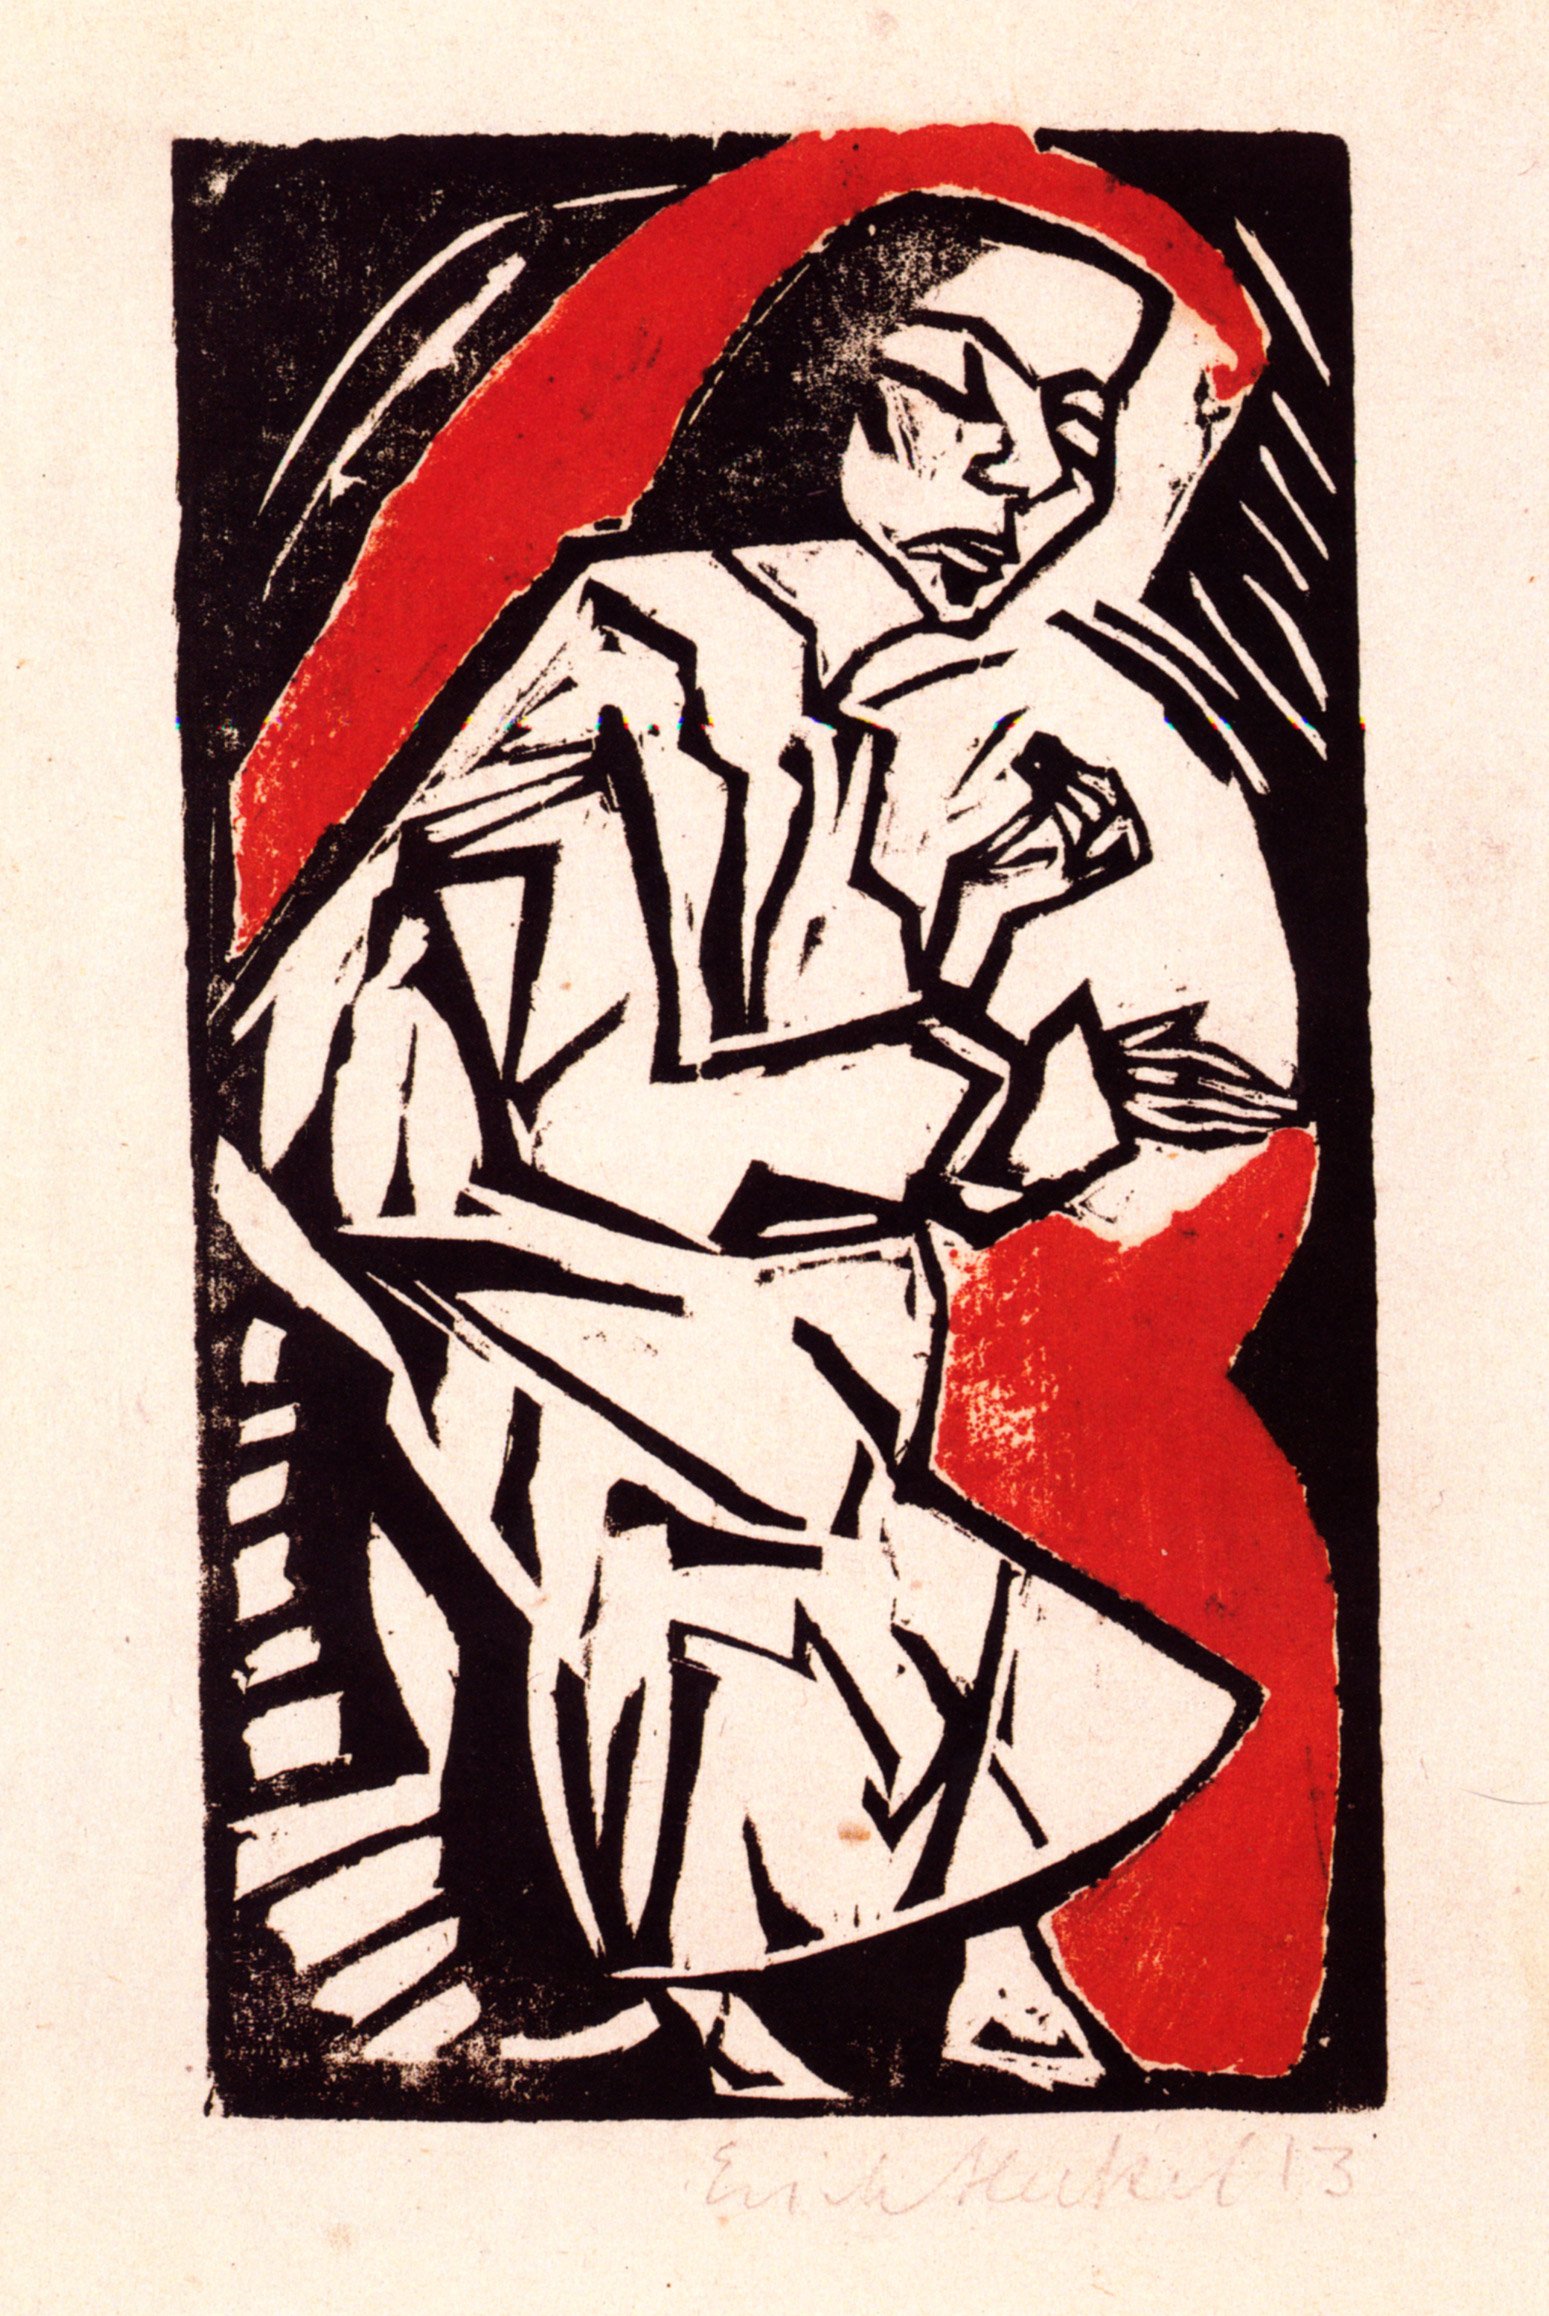   Erich Heckel  Germany, 1883–1970  Liegende (Reclining Woman),  1913 woodcut on heavy Japan paper, 18 7/8 x 12 1/8 inches Gift of David and Eva Bradford, 2014.33.4 